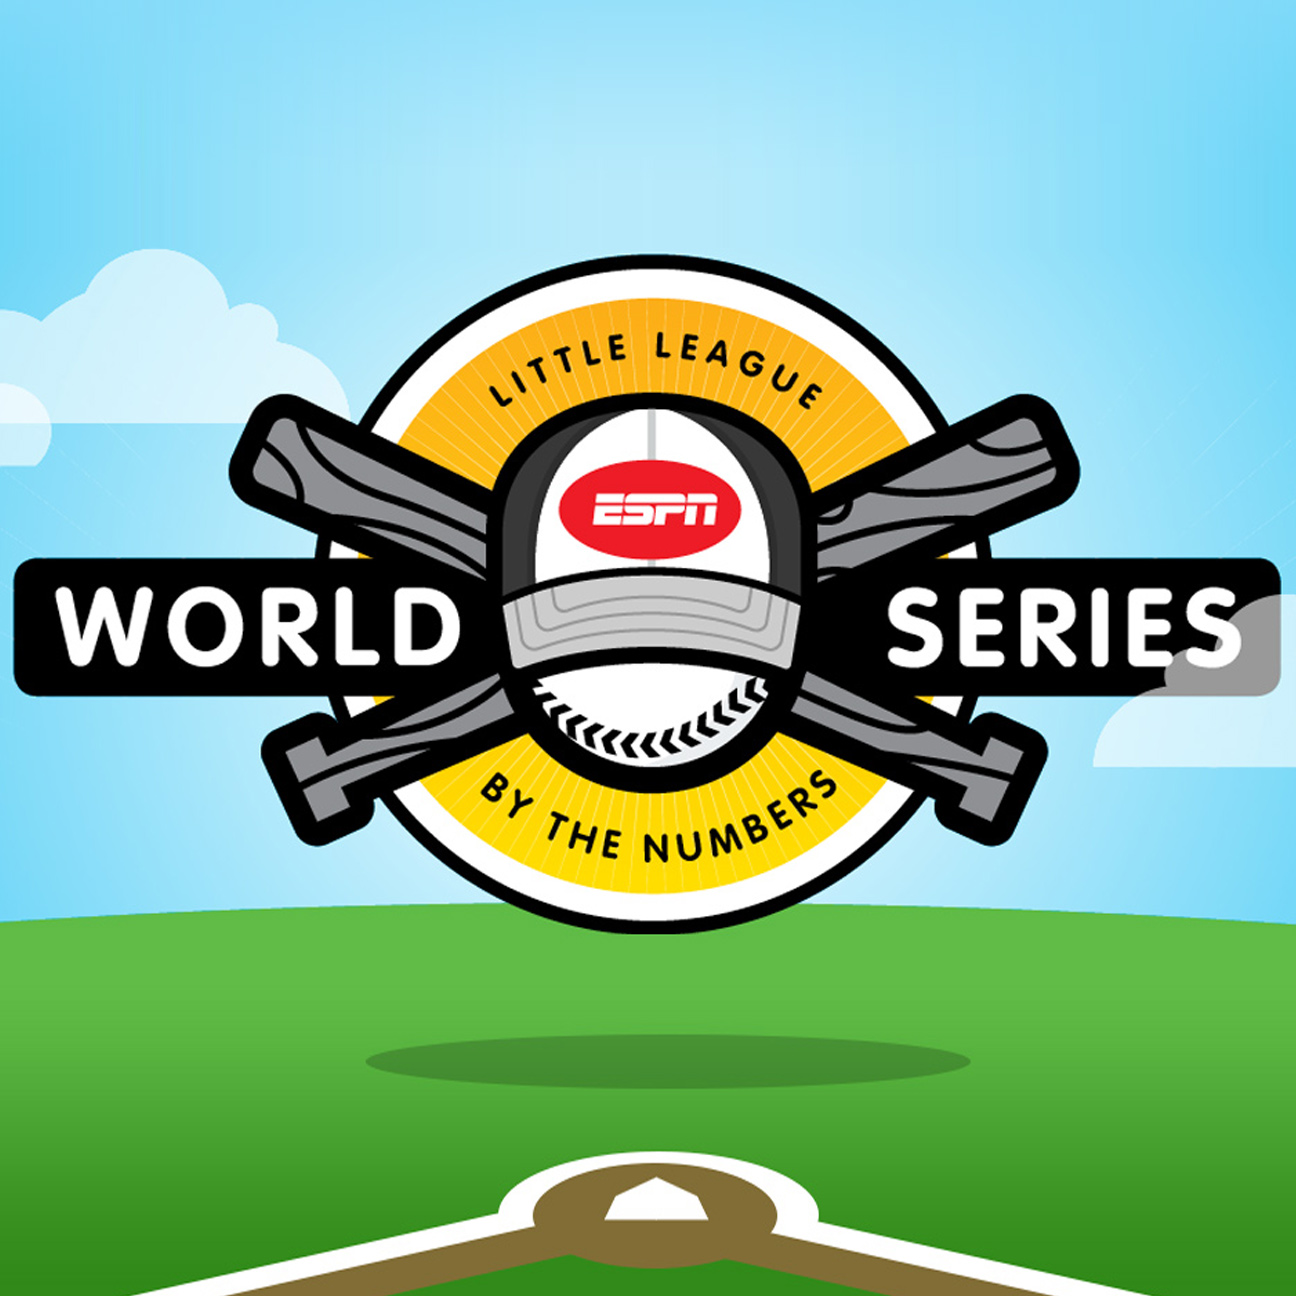 Little League® World Series Returns to ESPN This Summer with 337